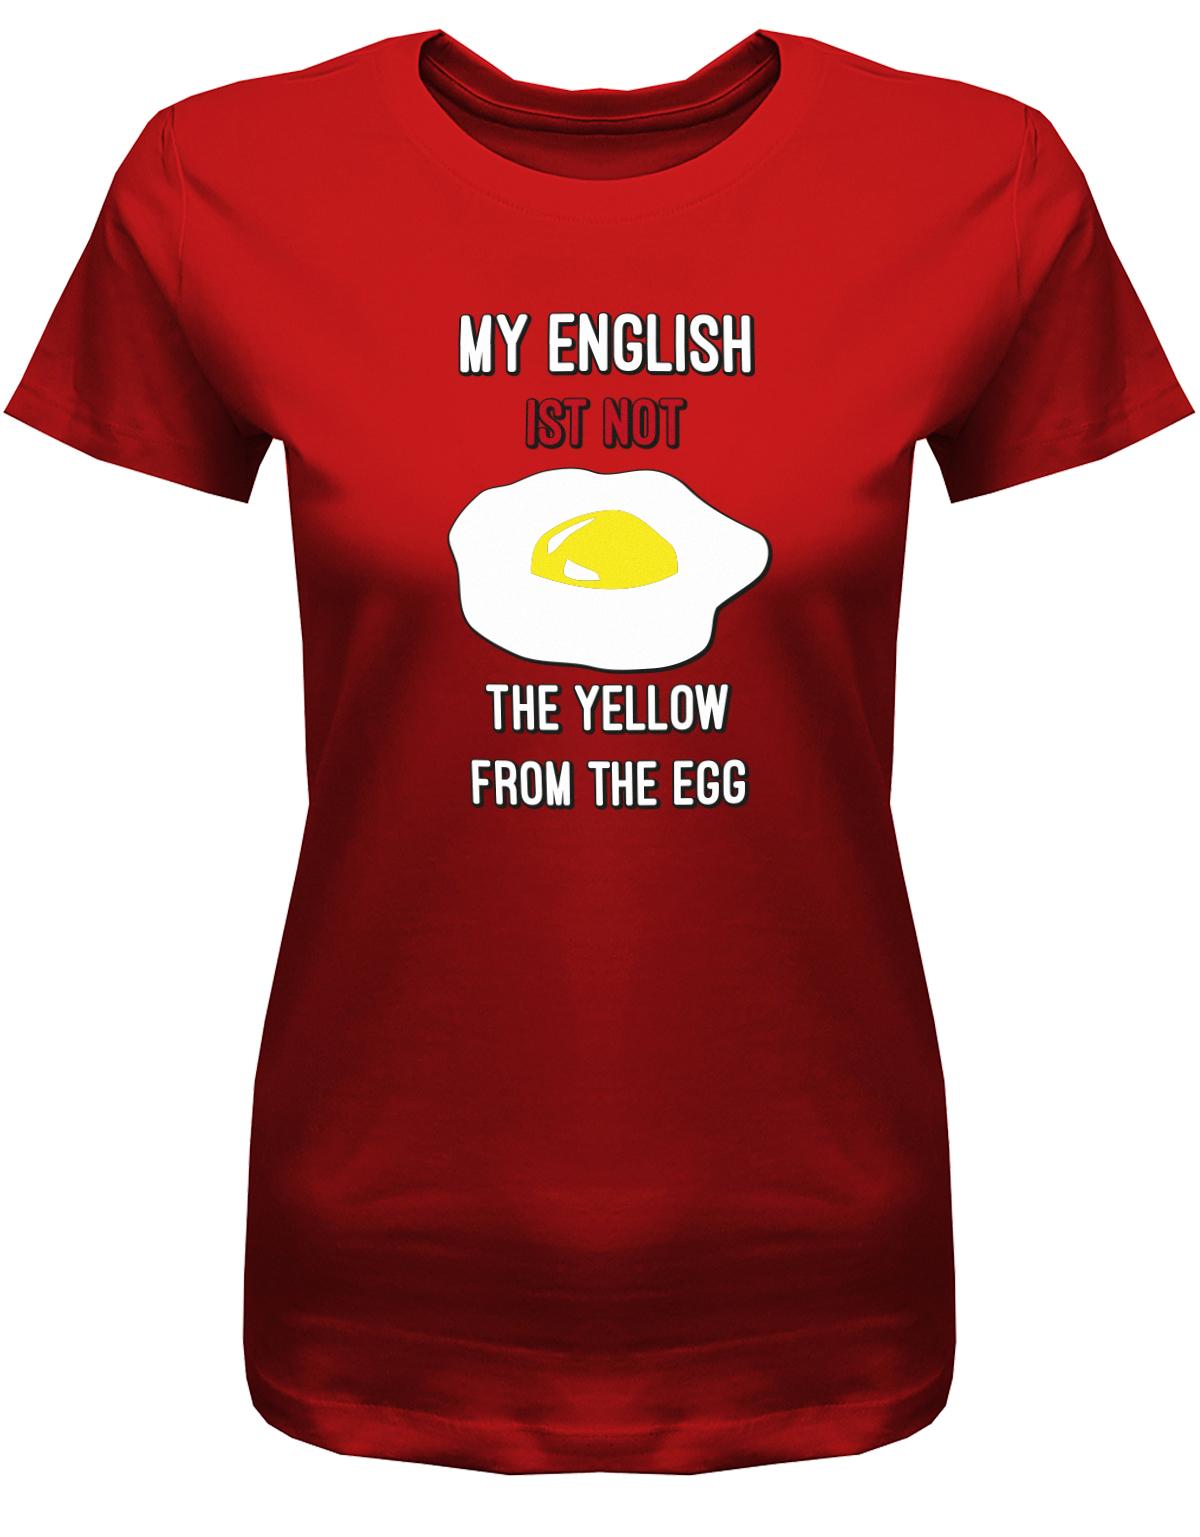 My-English-is-not-the-yellow-from-the-egg-Damen-Shirt-Rot